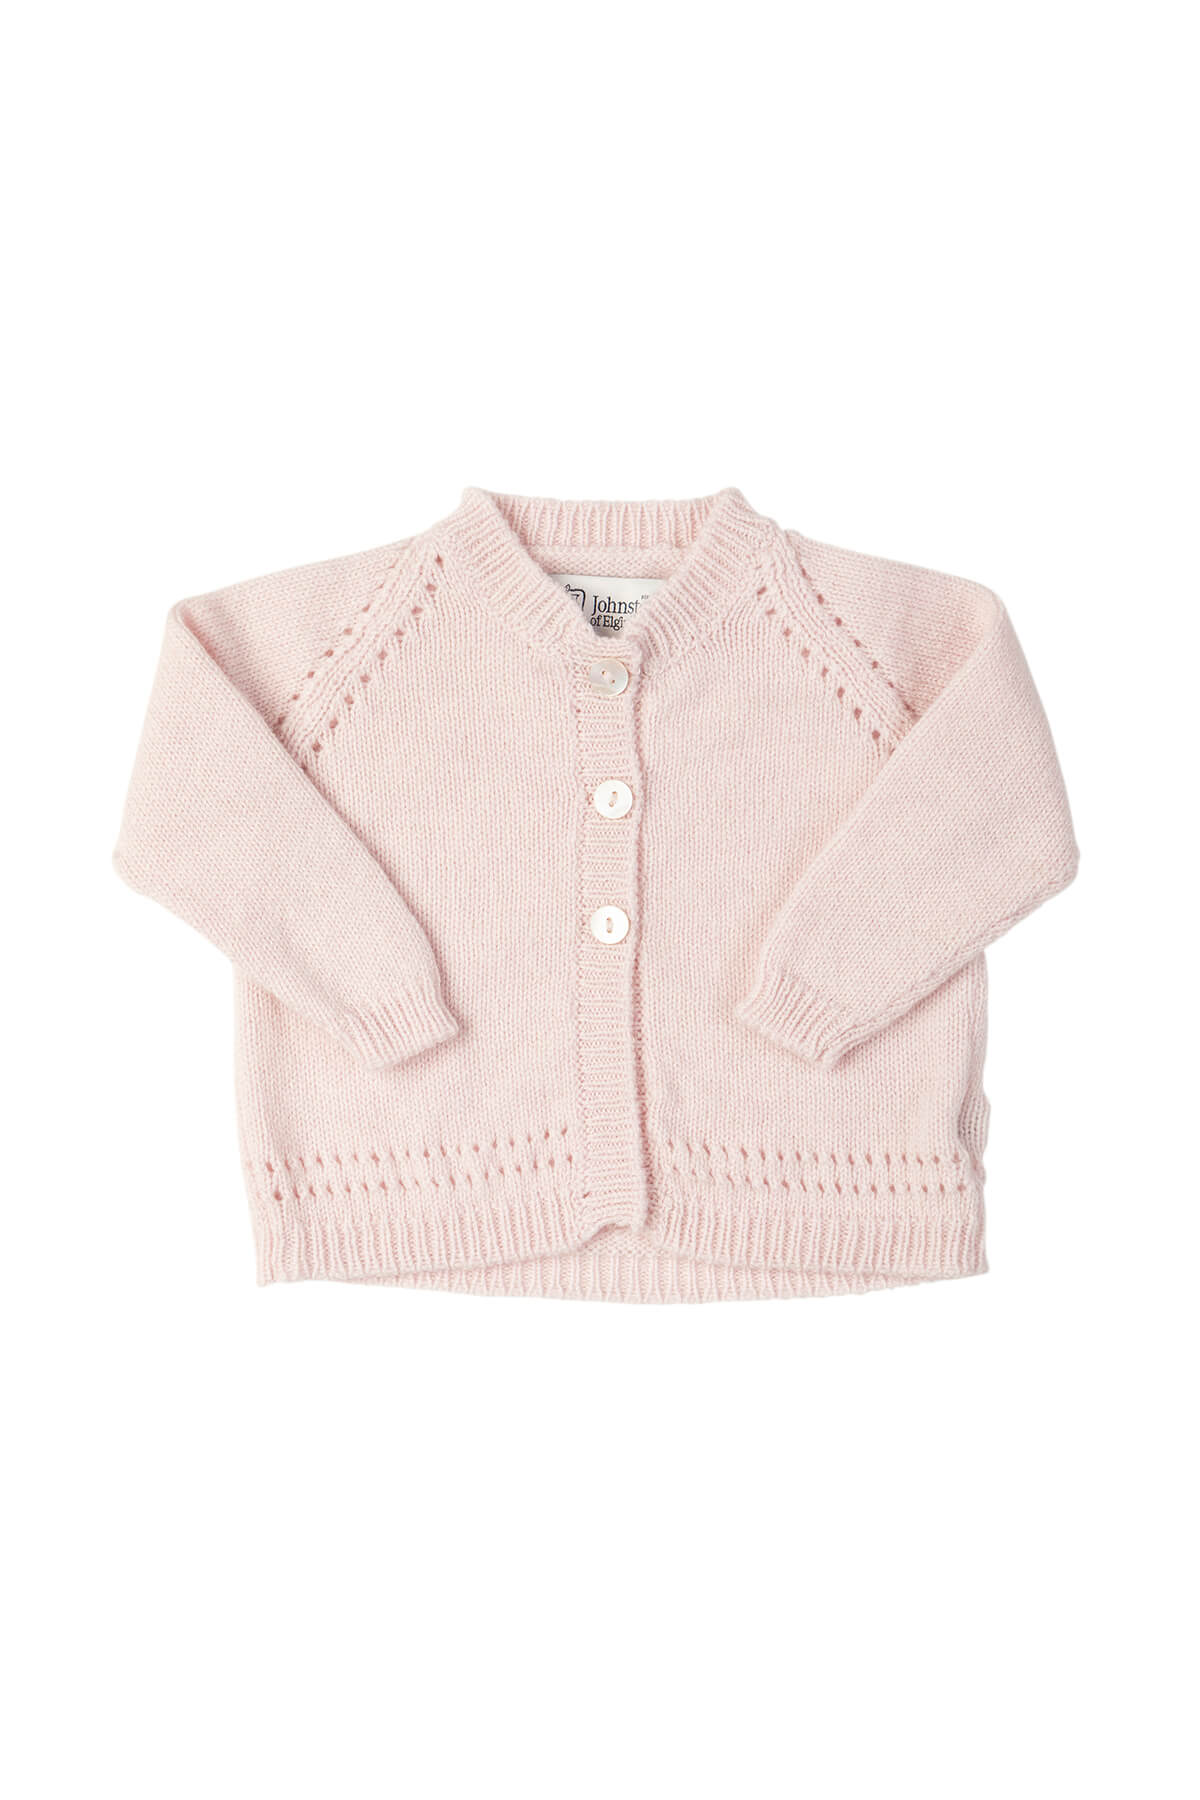 Johnstons of Elgin Hand Knitted Cashmere Baby Cardigan in Blush on a white background 30193P191